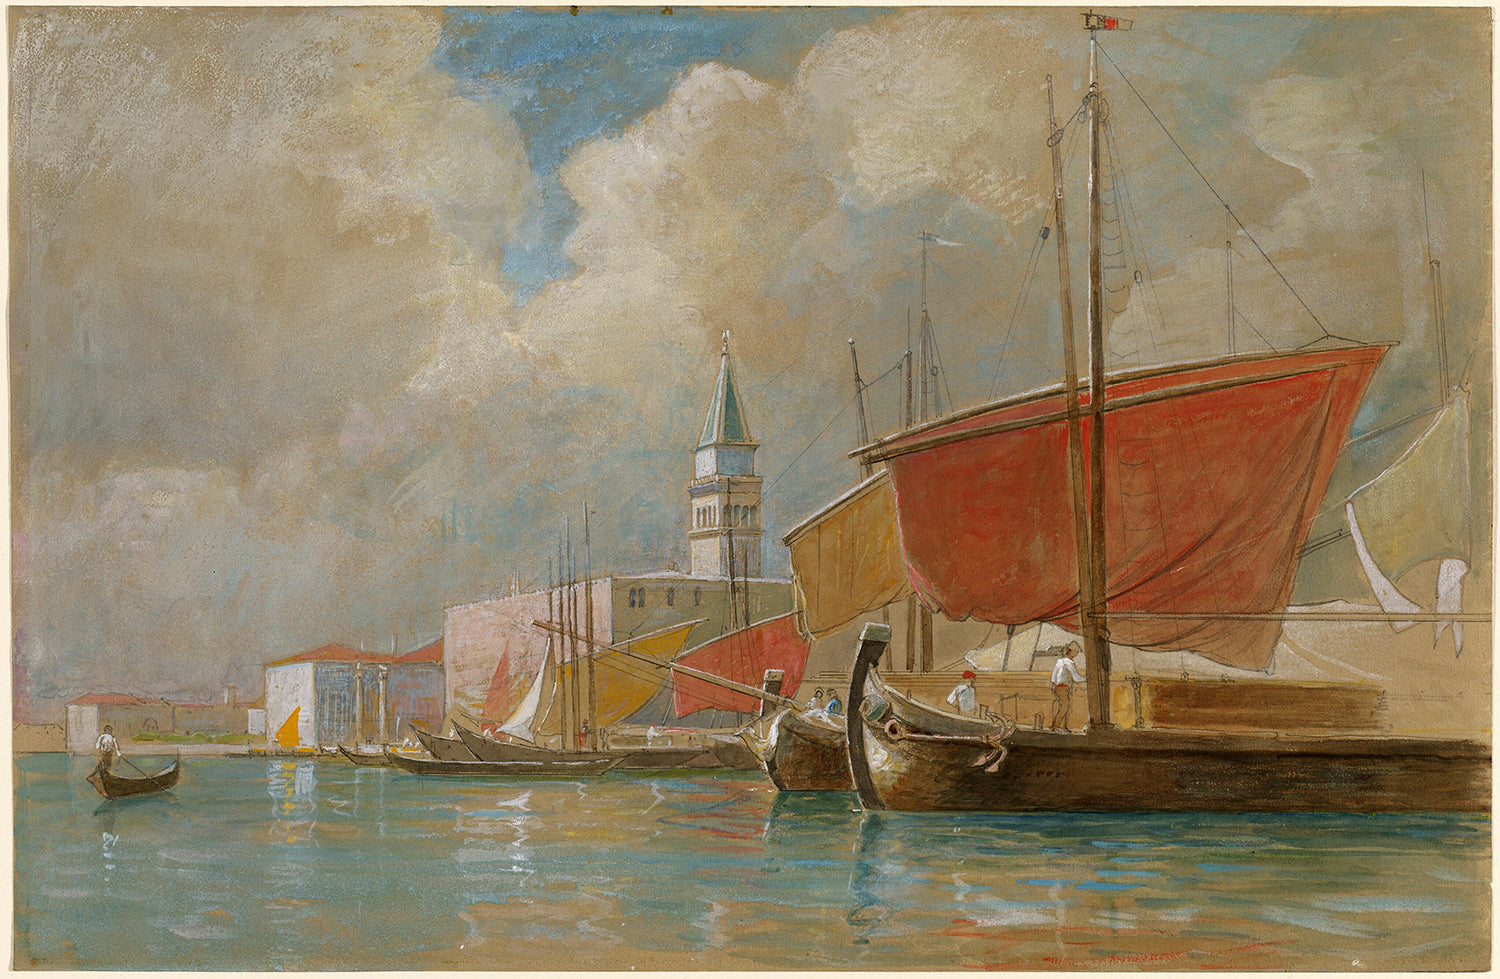 Shipping Along the Molo in Venice by William Stanley Haseltine Art Print